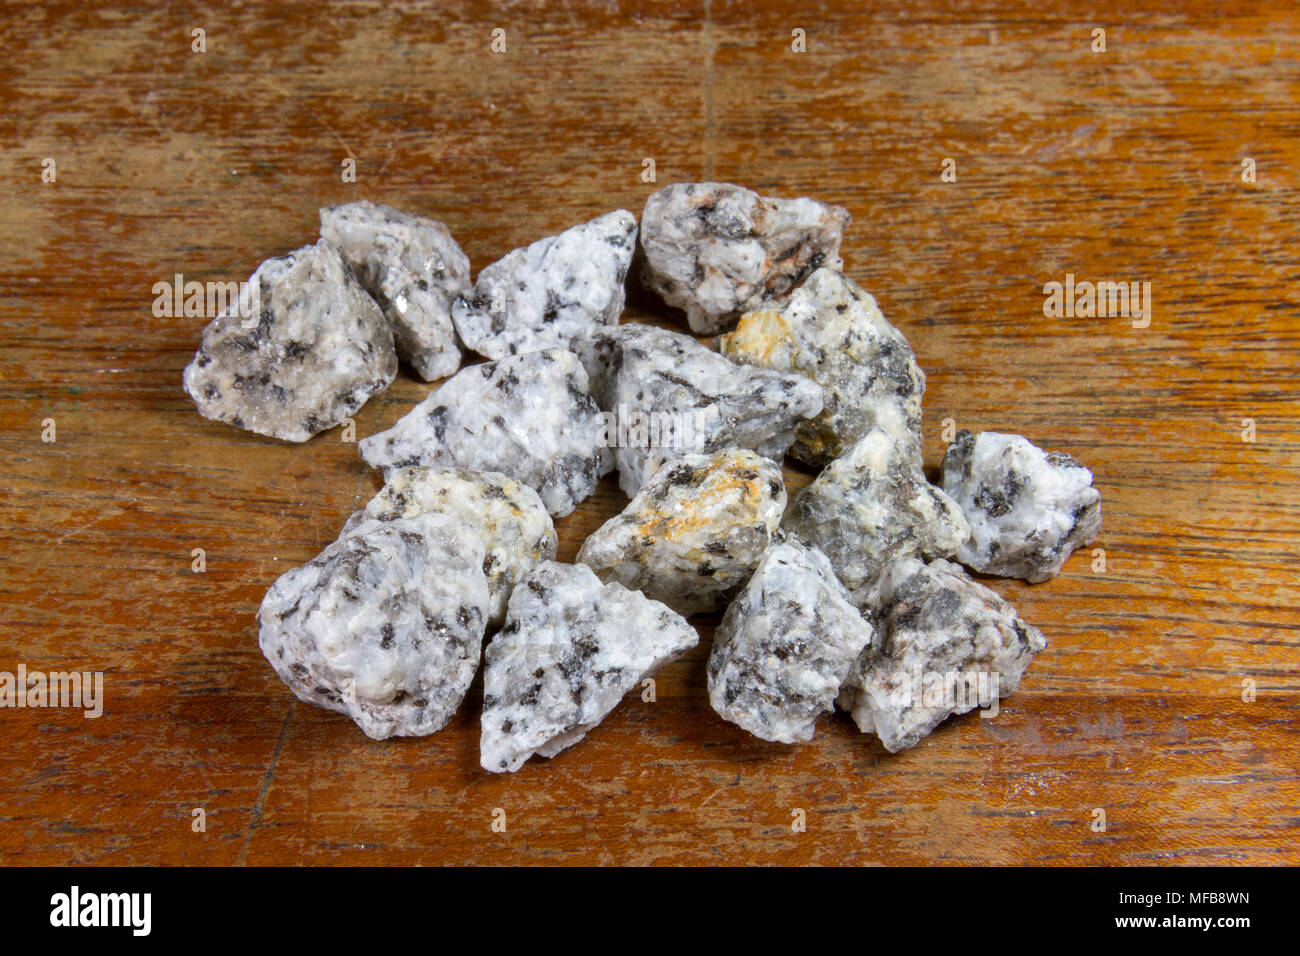 Pieces of granite as used in a UK secondary/high school. Stock Photo